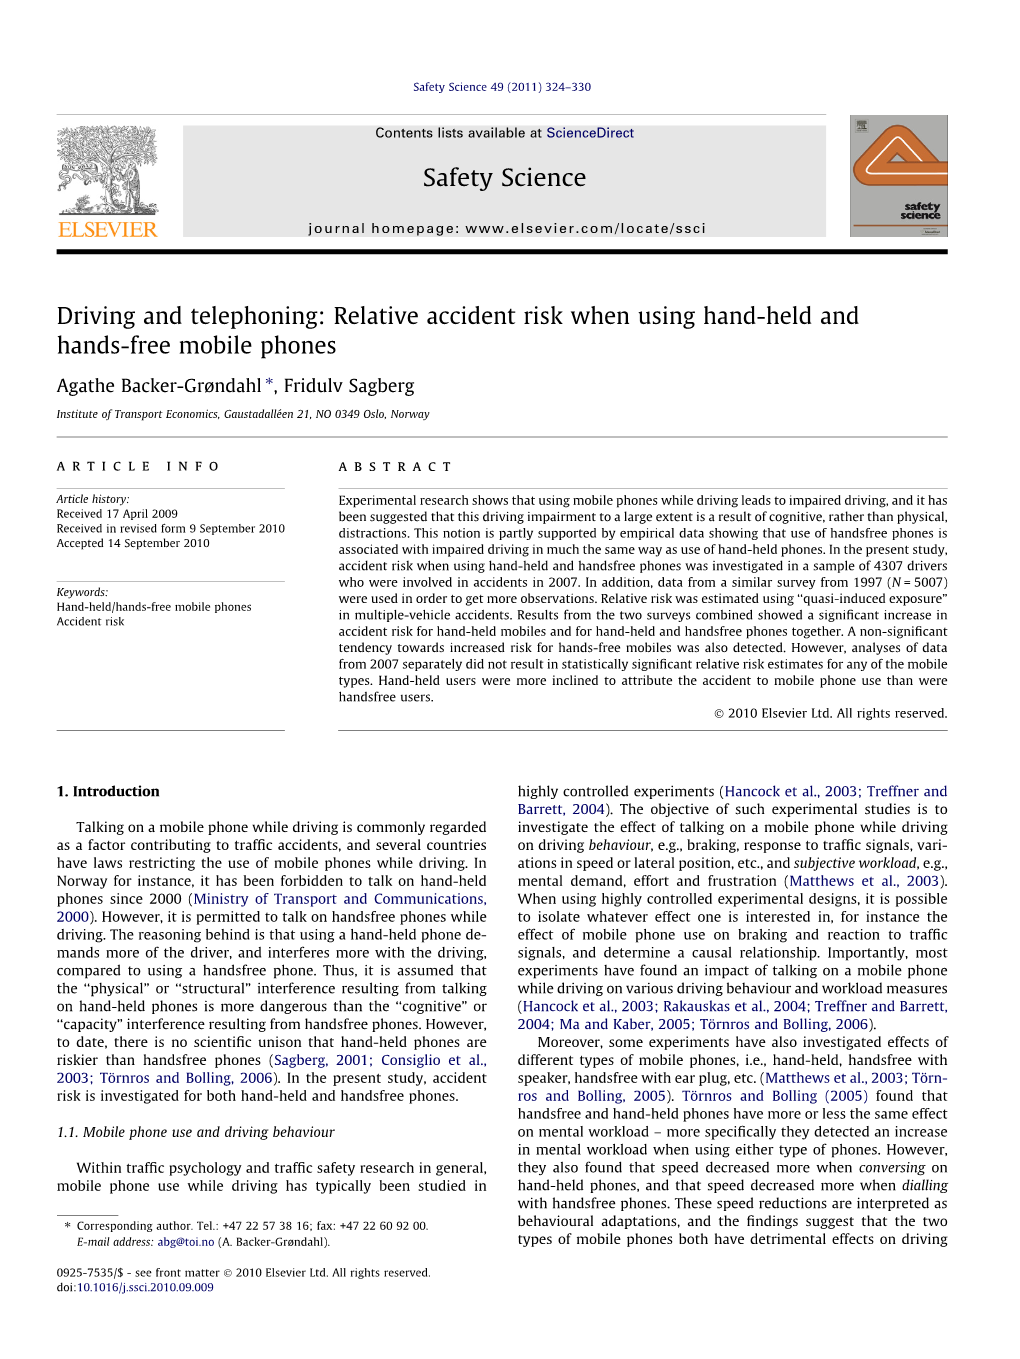 Driving and Telephoning: Relative Accident Risk When Using Hand-Held and Hands-Free Mobile Phones ⇑ Agathe Backer-Grøndahl , Fridulv Sagberg